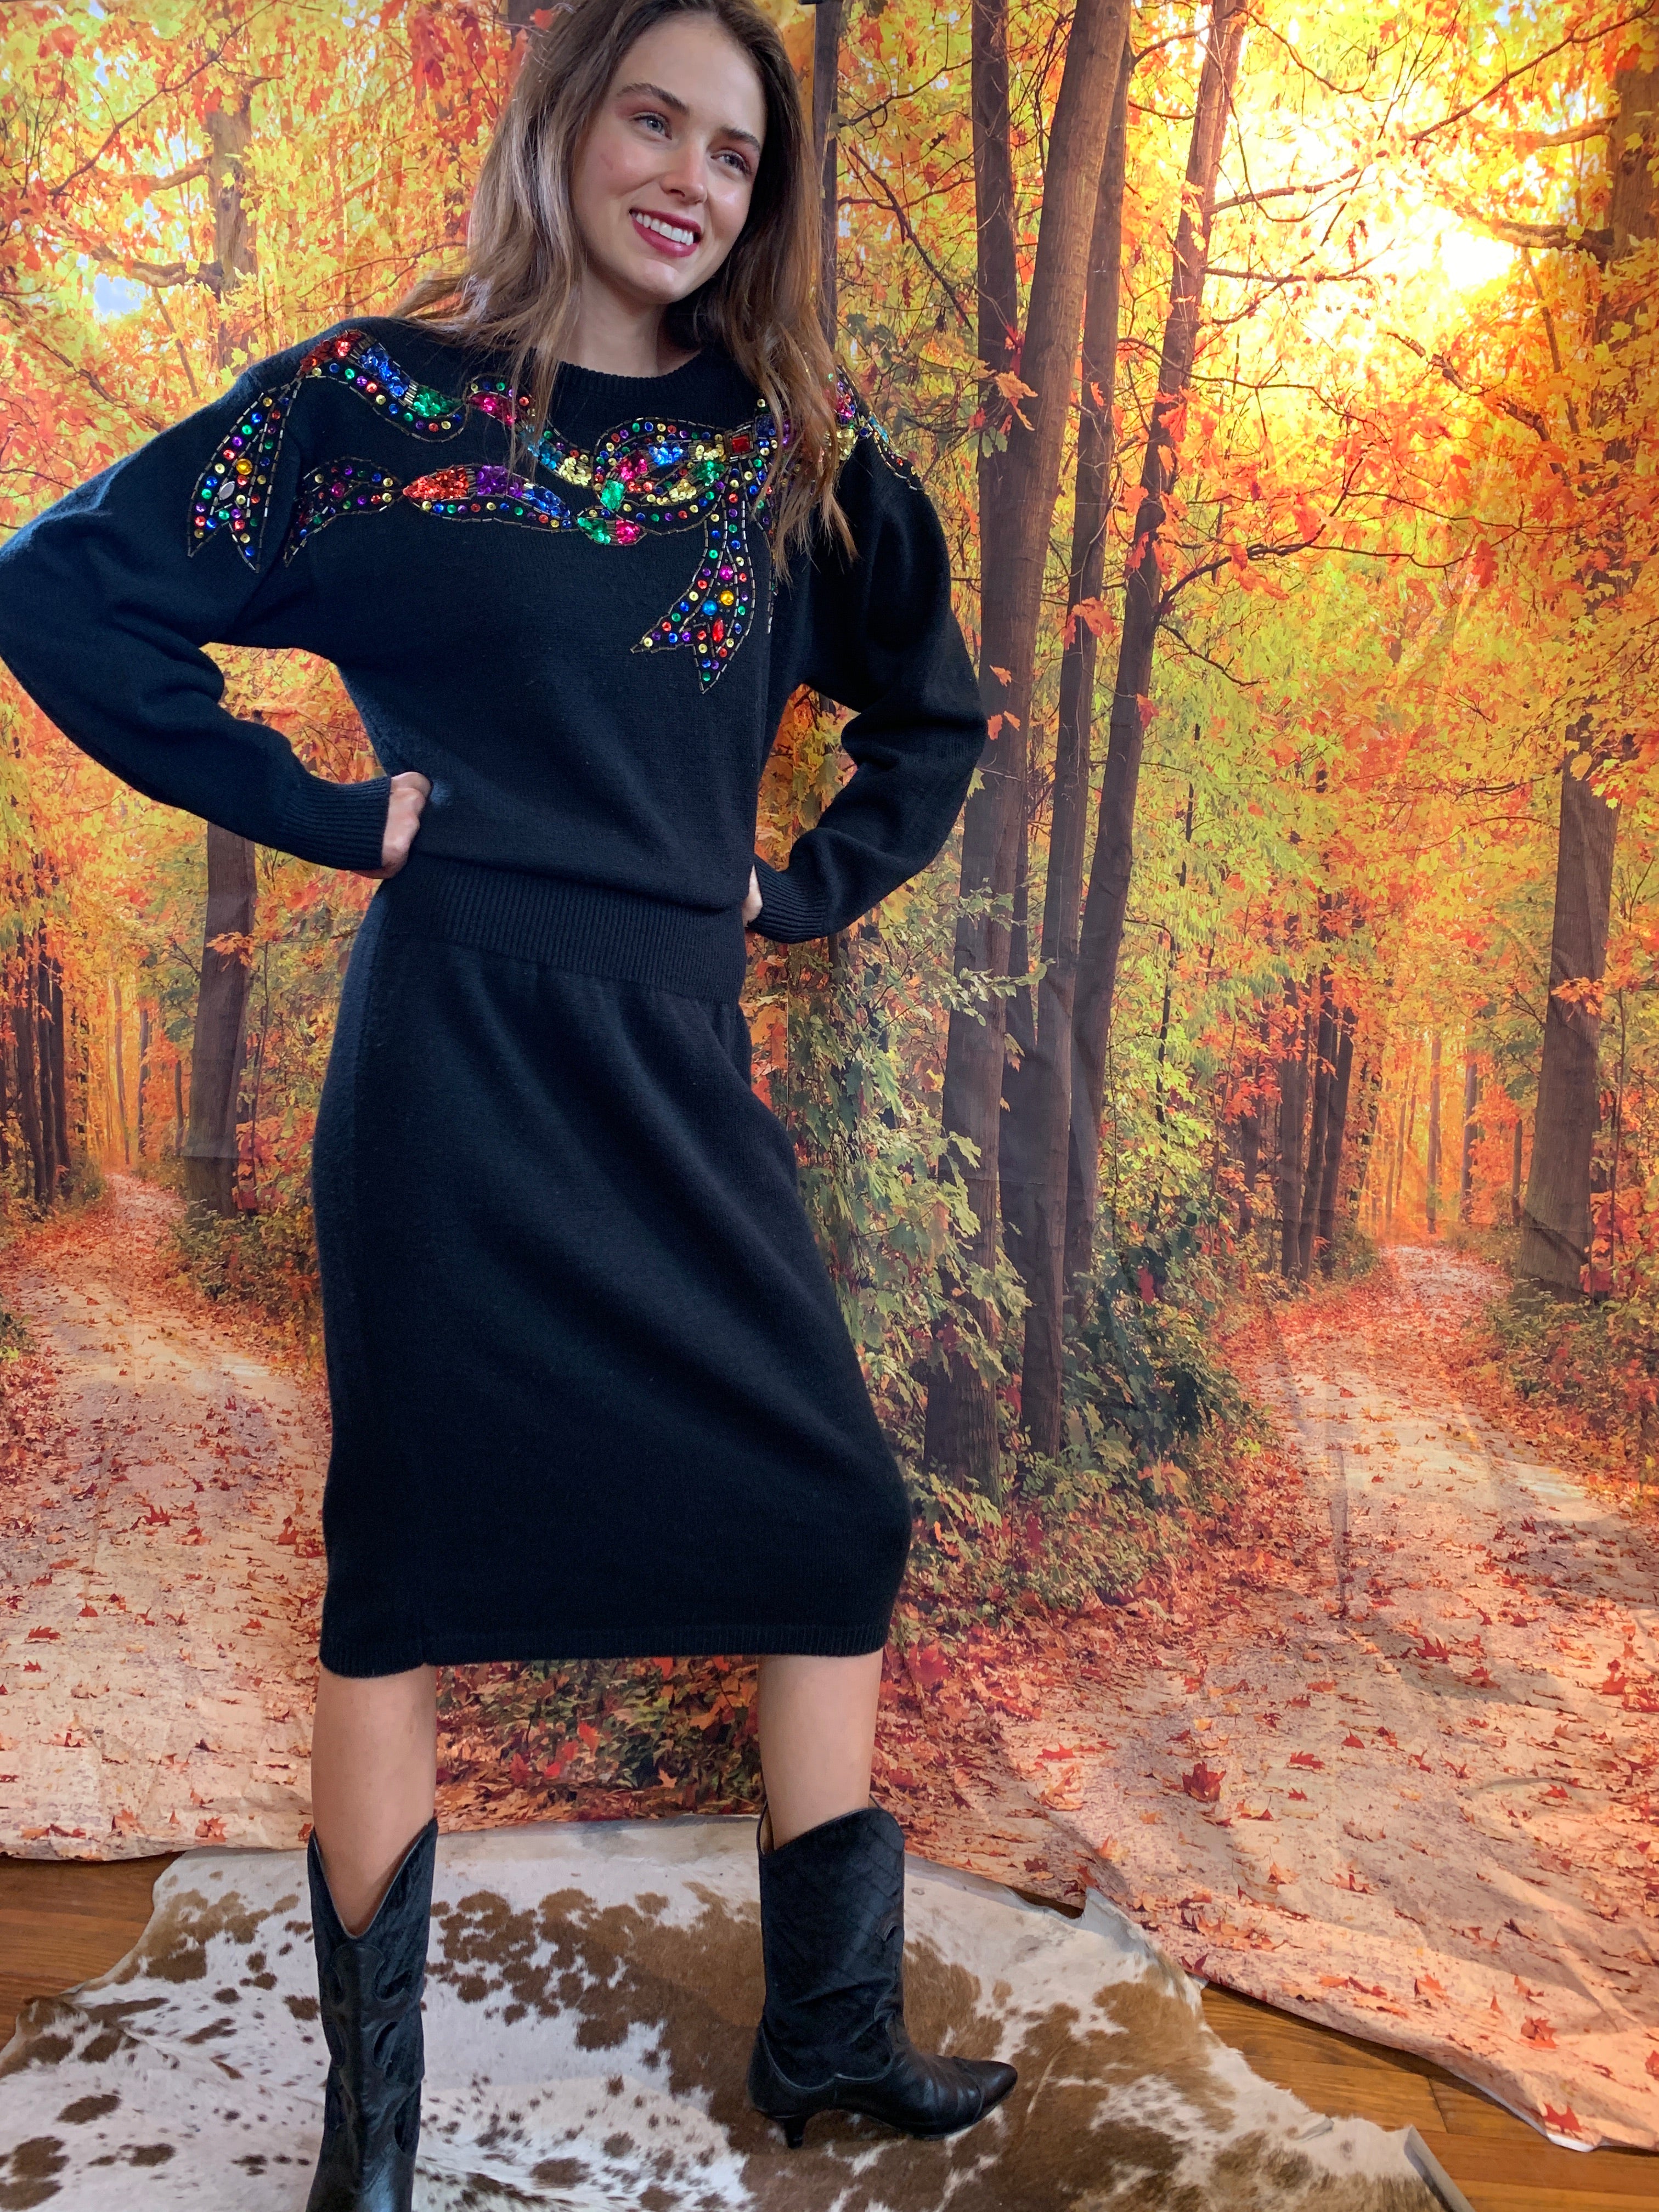 Black knit dress with colorful gems